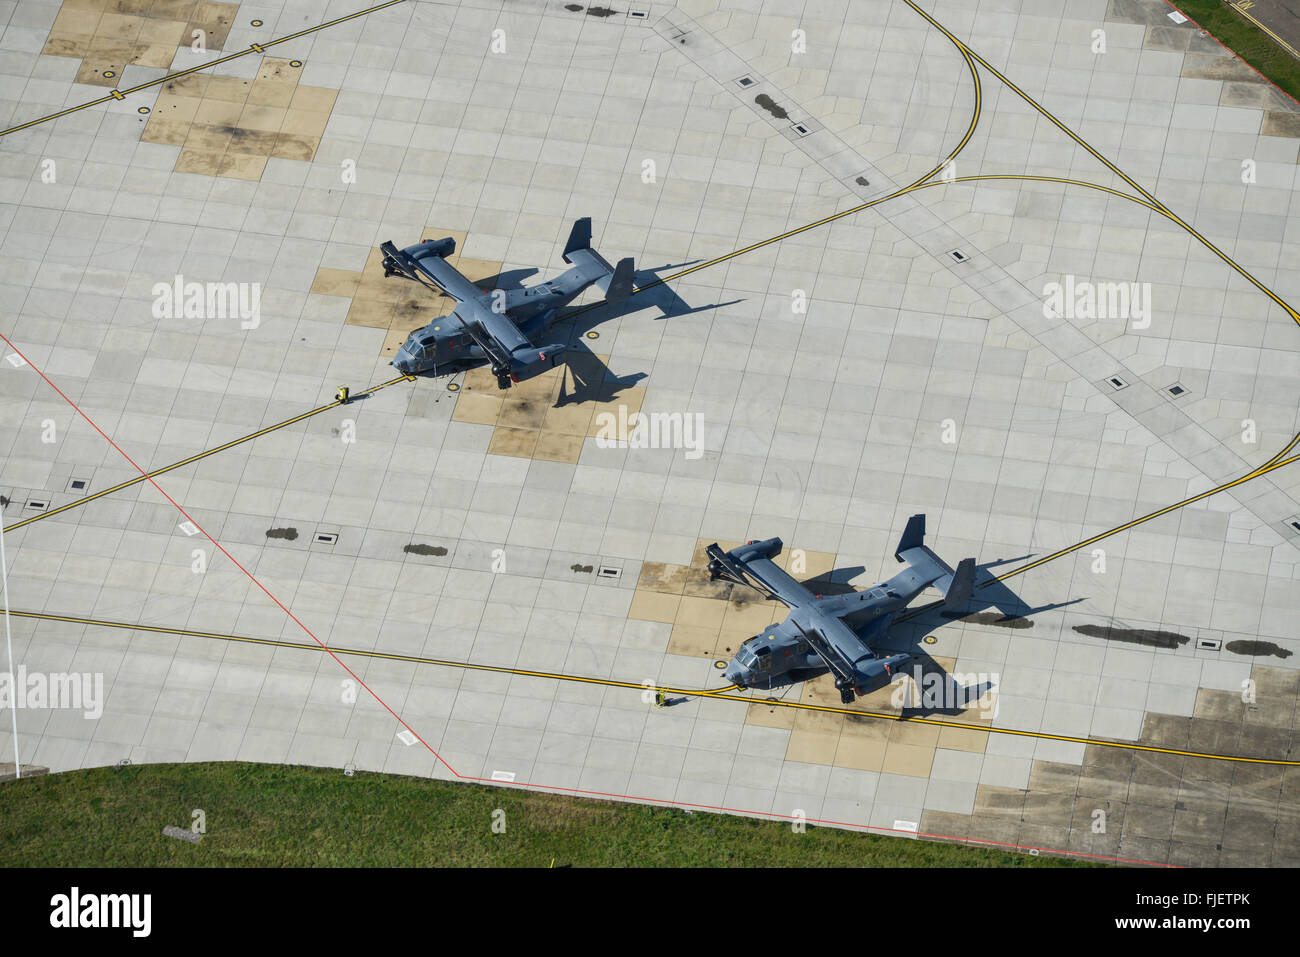 US Military aircraft on the apron of an airbase in England Stock Photo